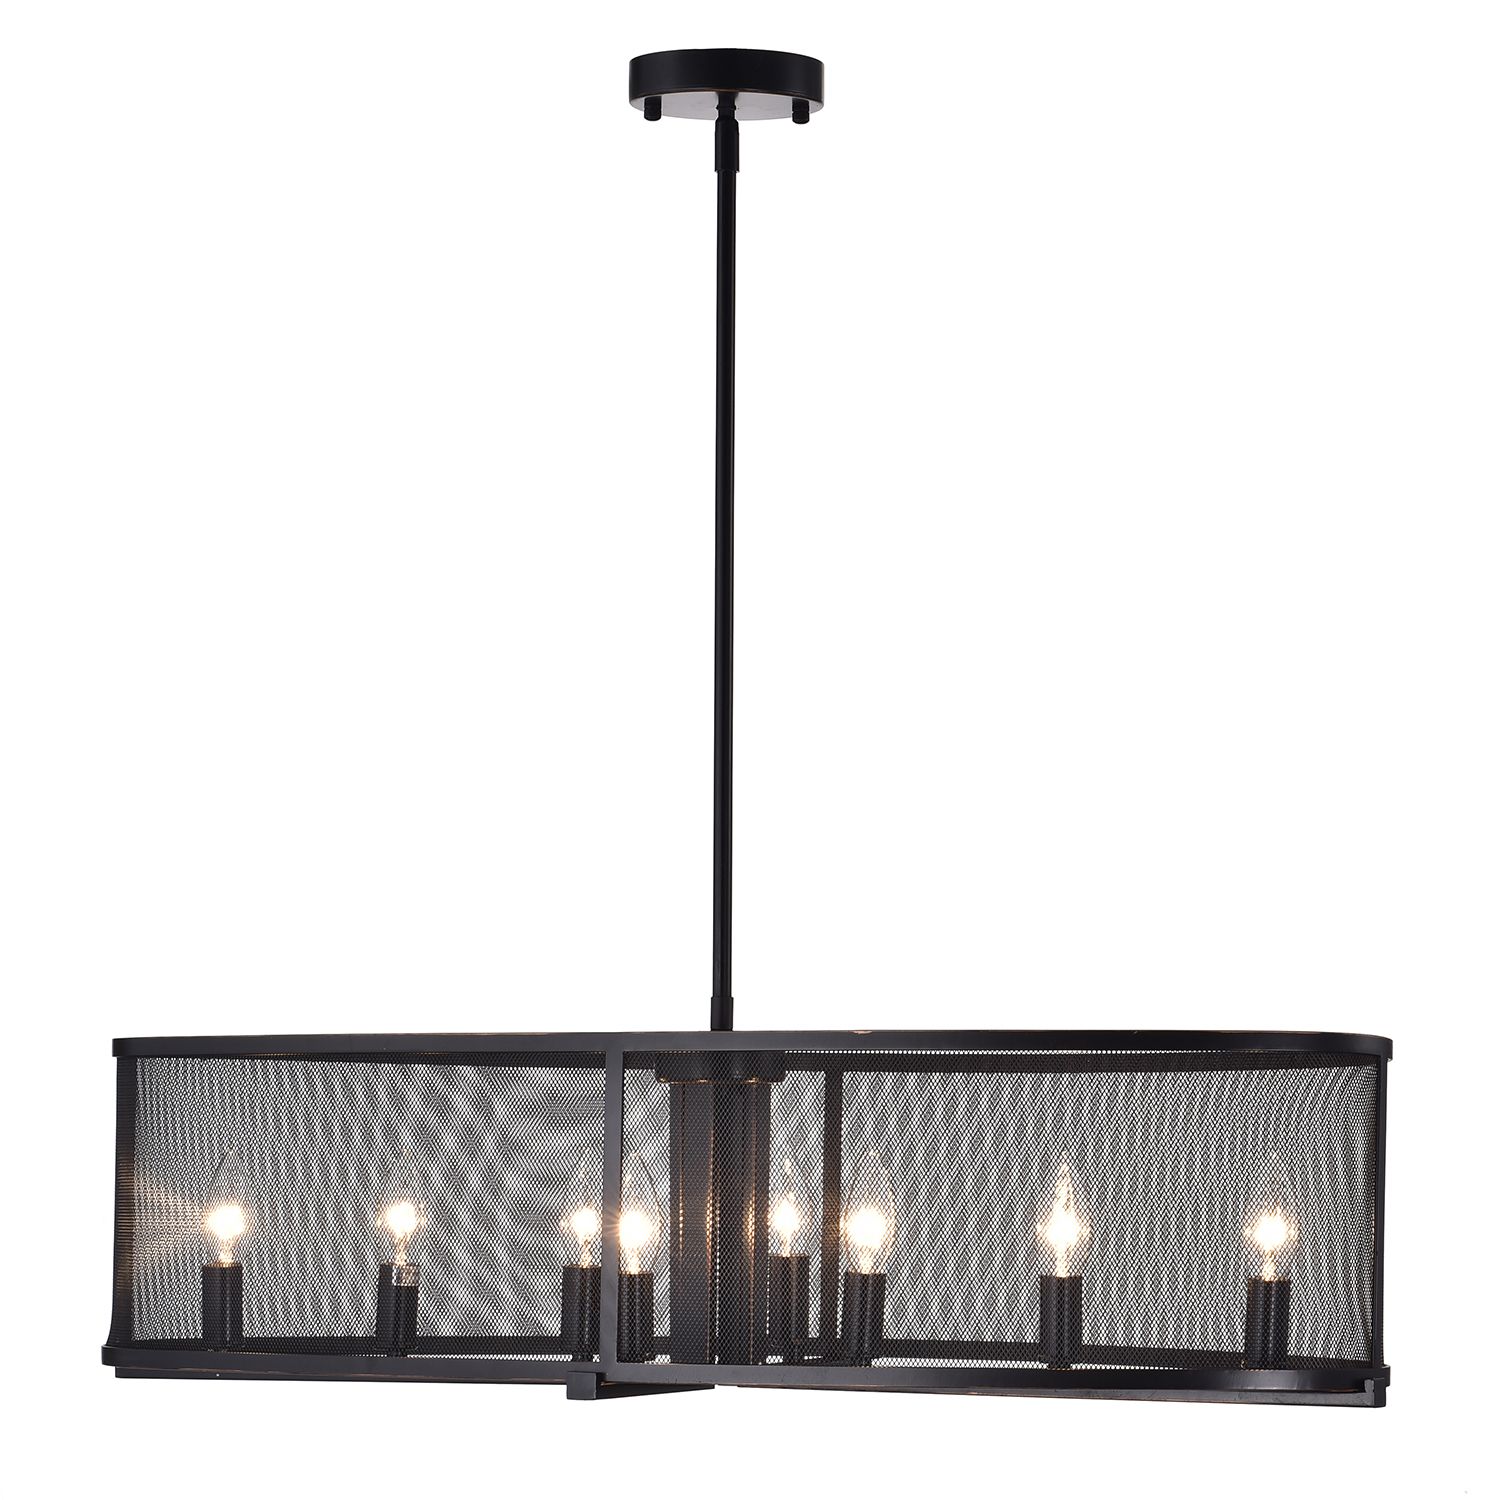 Aludra 8 Light Oil Rubbed Bronze Oval Metal Mesh Shade Intended For Steel Eight Light Chandeliers (View 13 of 15)